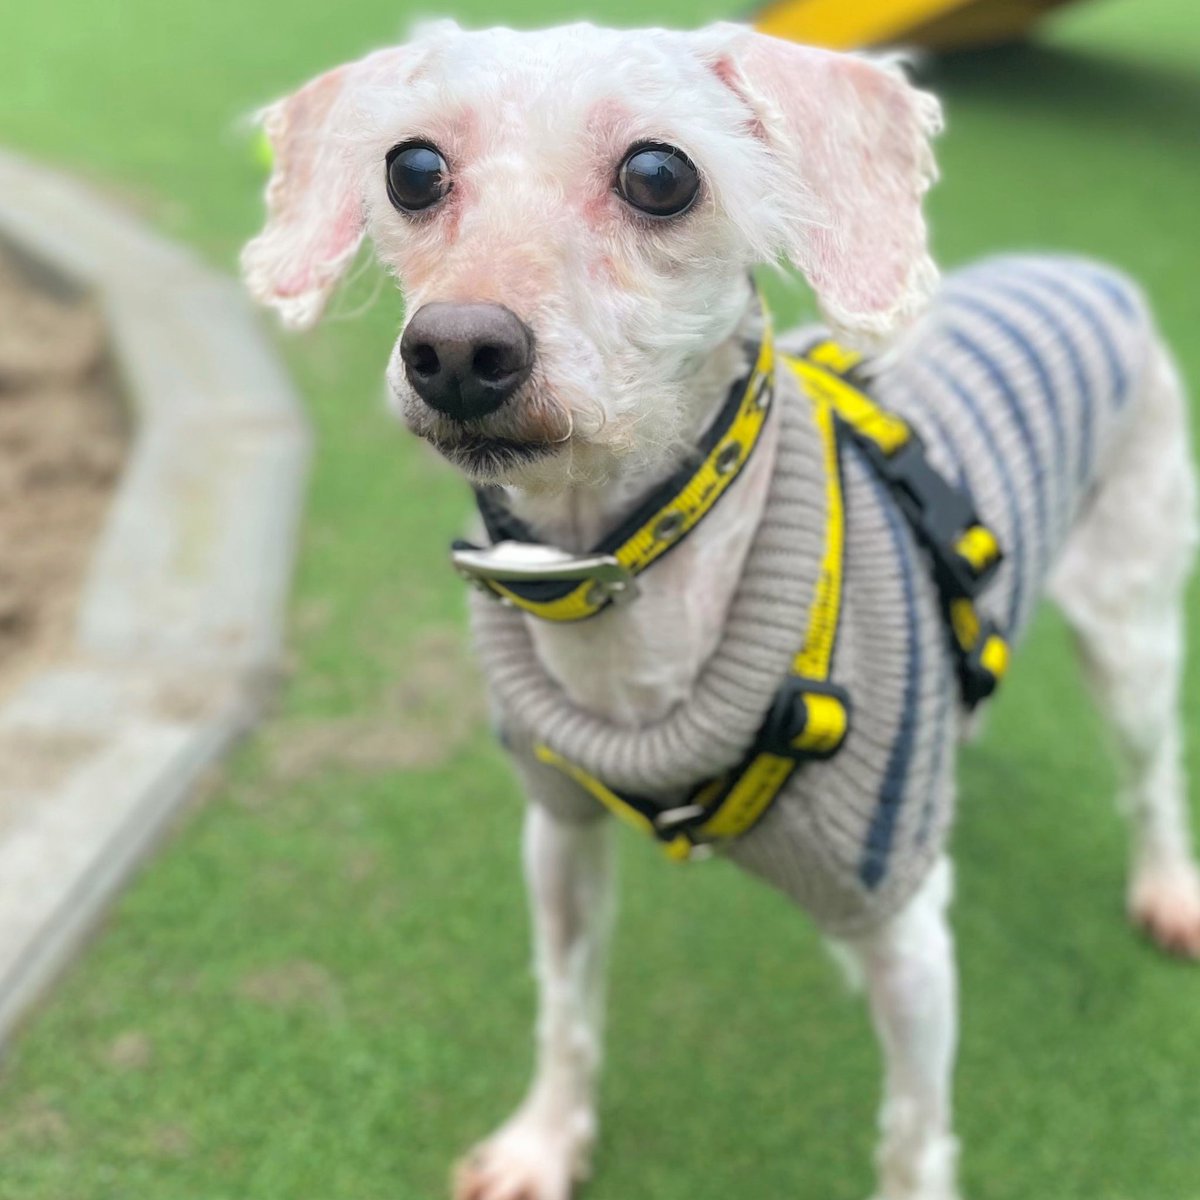 Jonah is here to brighten up your Monday morning! How did he do? 💛

This little guy is a 7 year old Poodle crossbreed looking for a home to call his own 🏡 submit an application to see if you’re a match! 👉 dogstrust.org.uk/rehoming/how-t…

@DogsTrust 
#ADIFL #MondayMotivation #AdoptADog